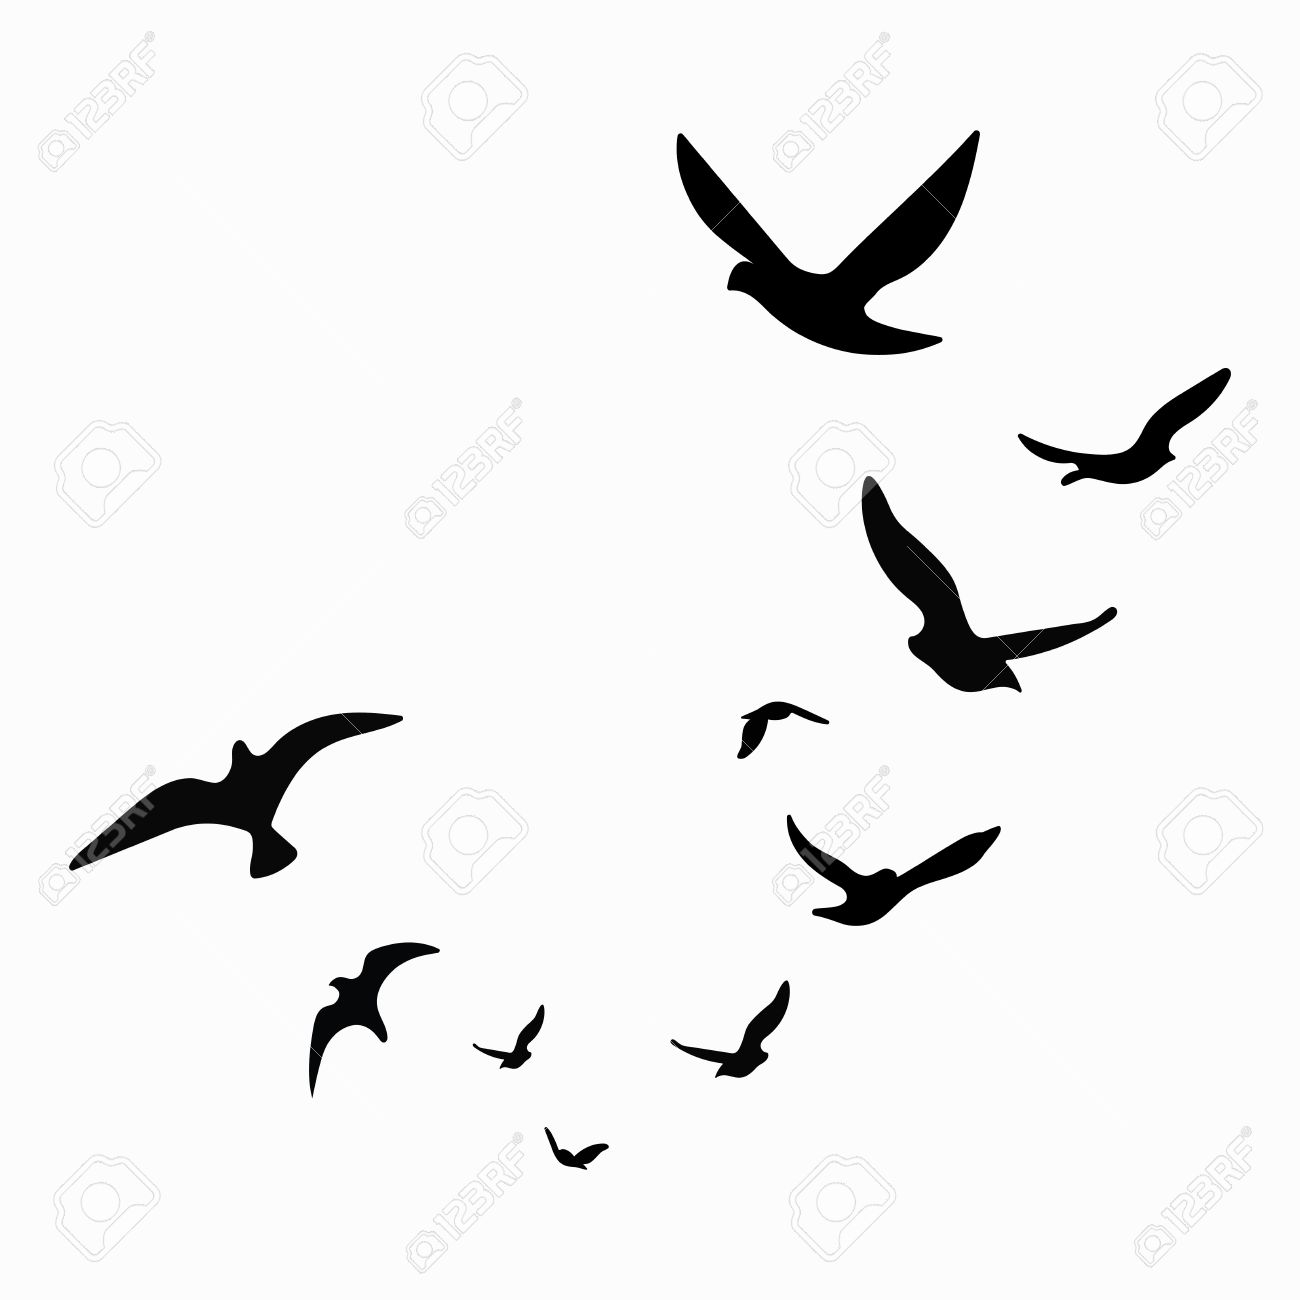 Silhouette Of A Flock Of Birds Black Contours Of Flying Birds pertaining to sizing 1300 X 1300